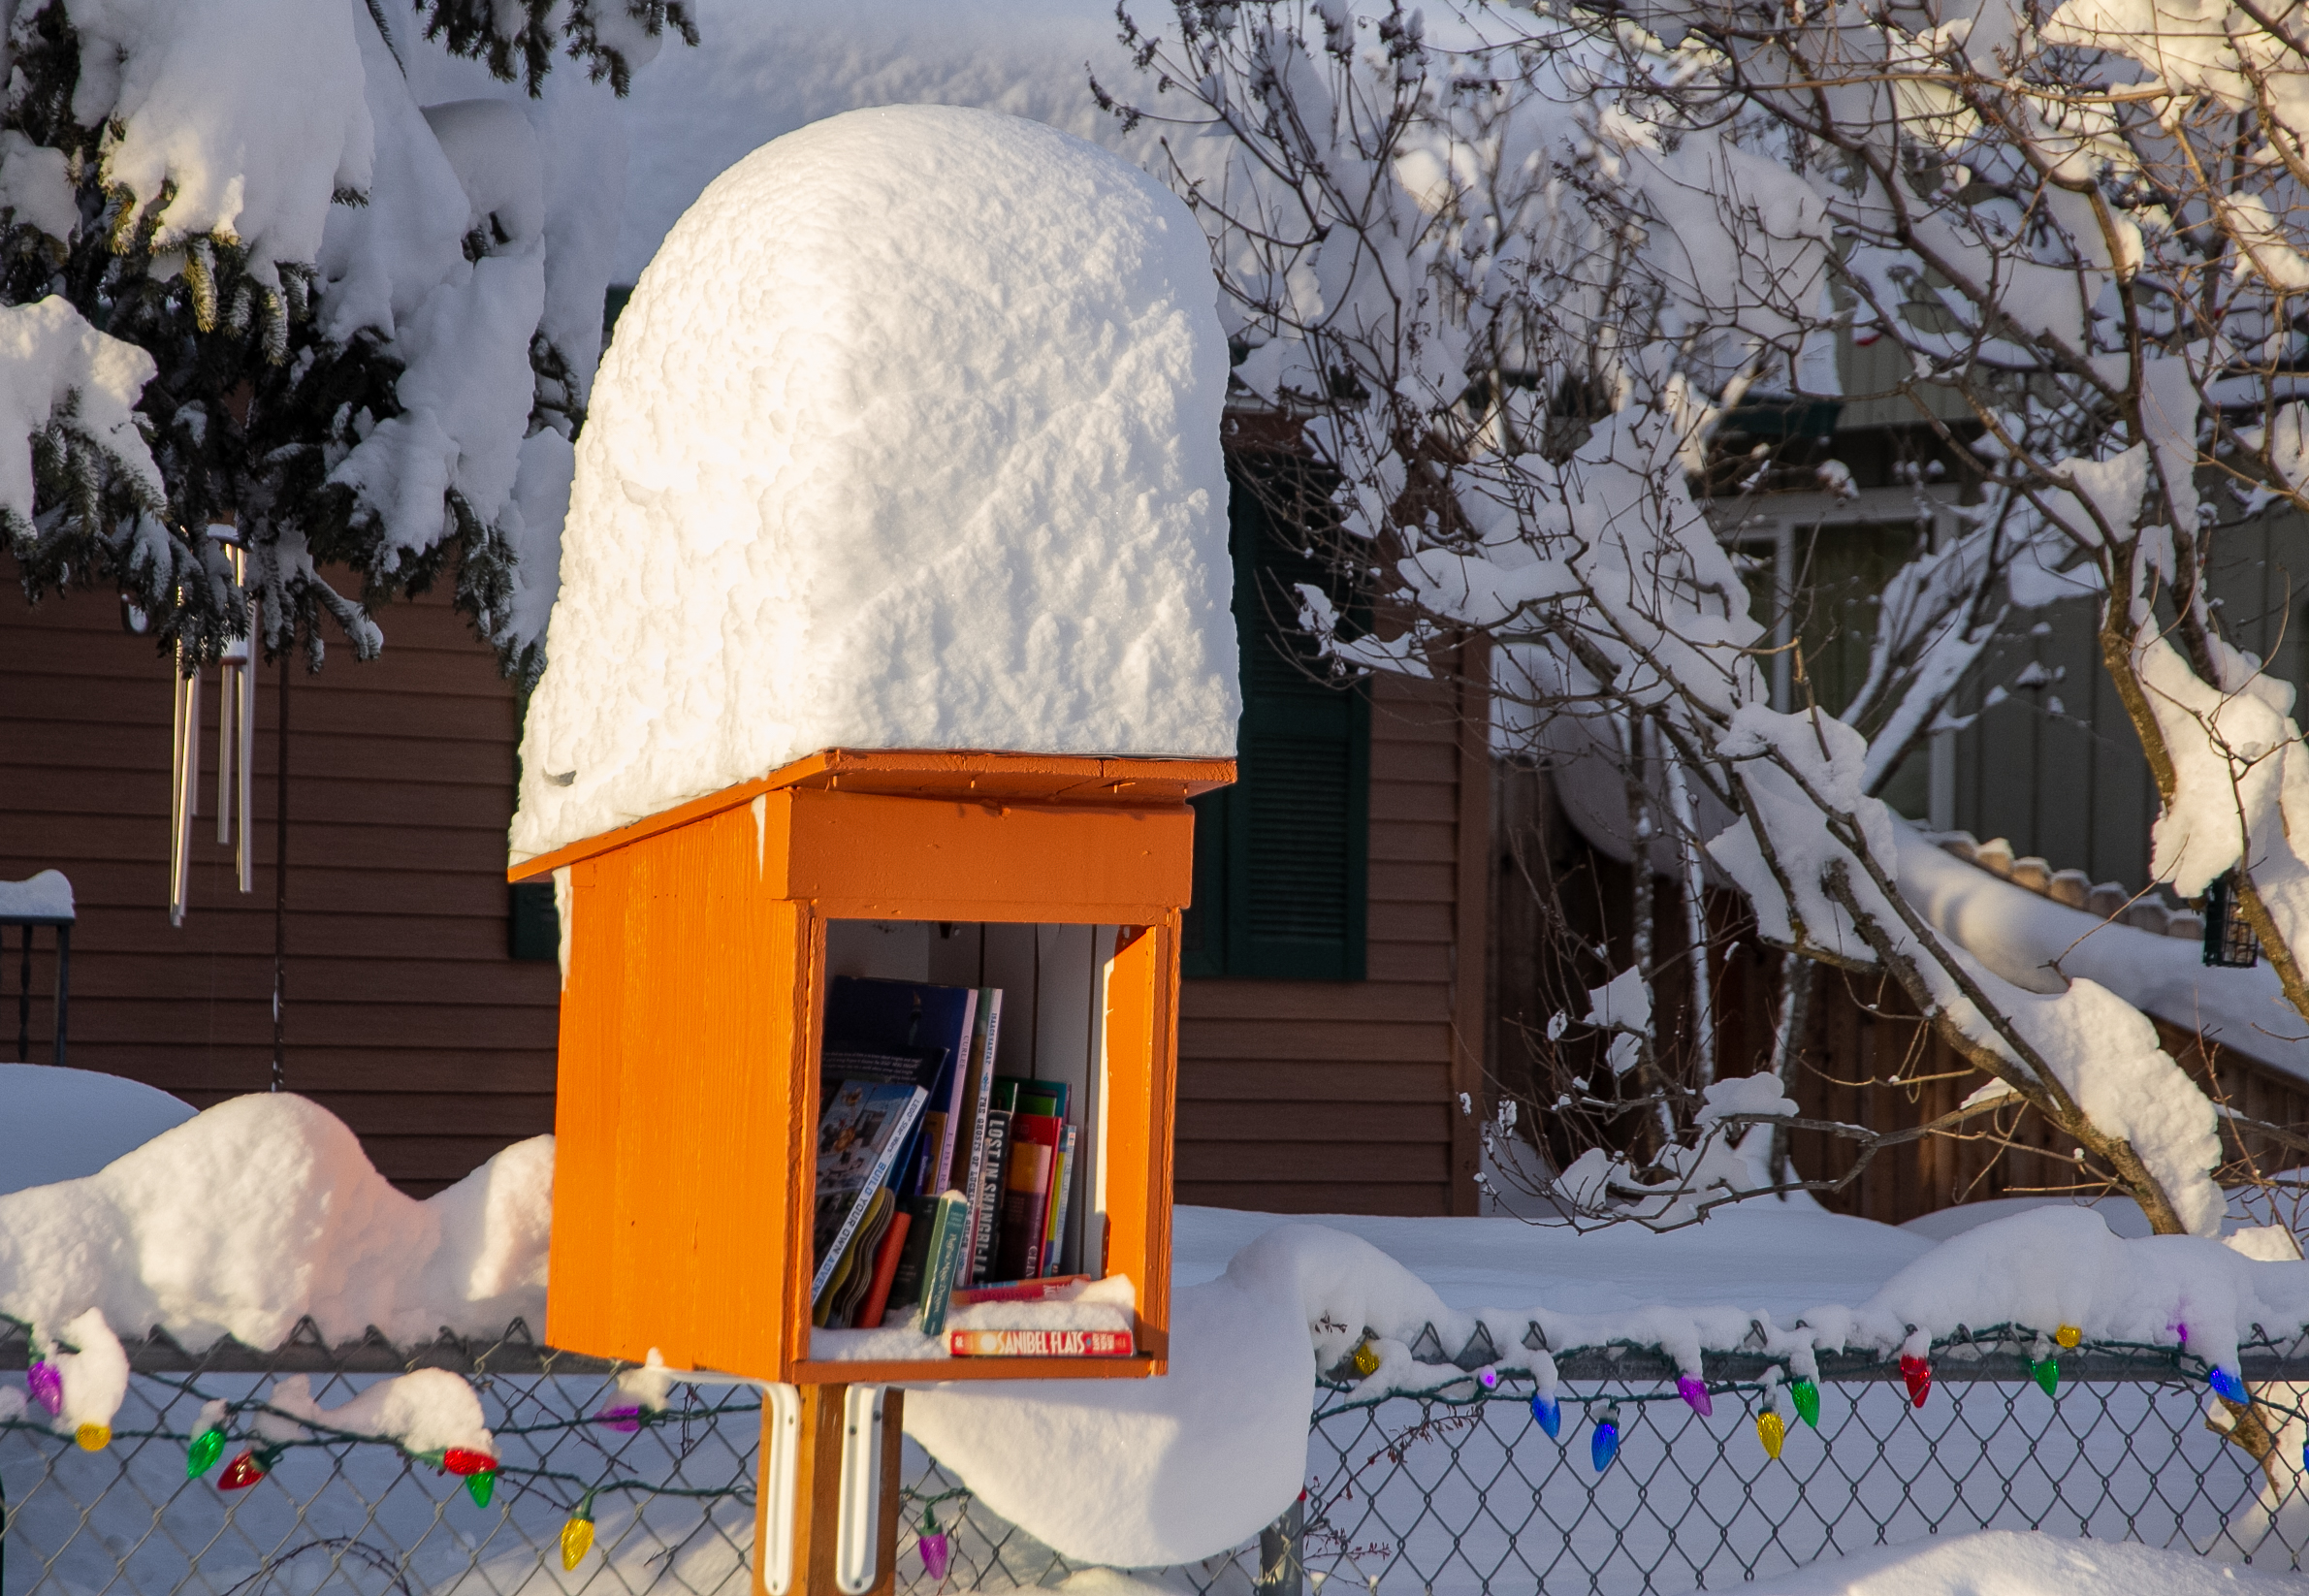 Snow is piled high on a book drop box.